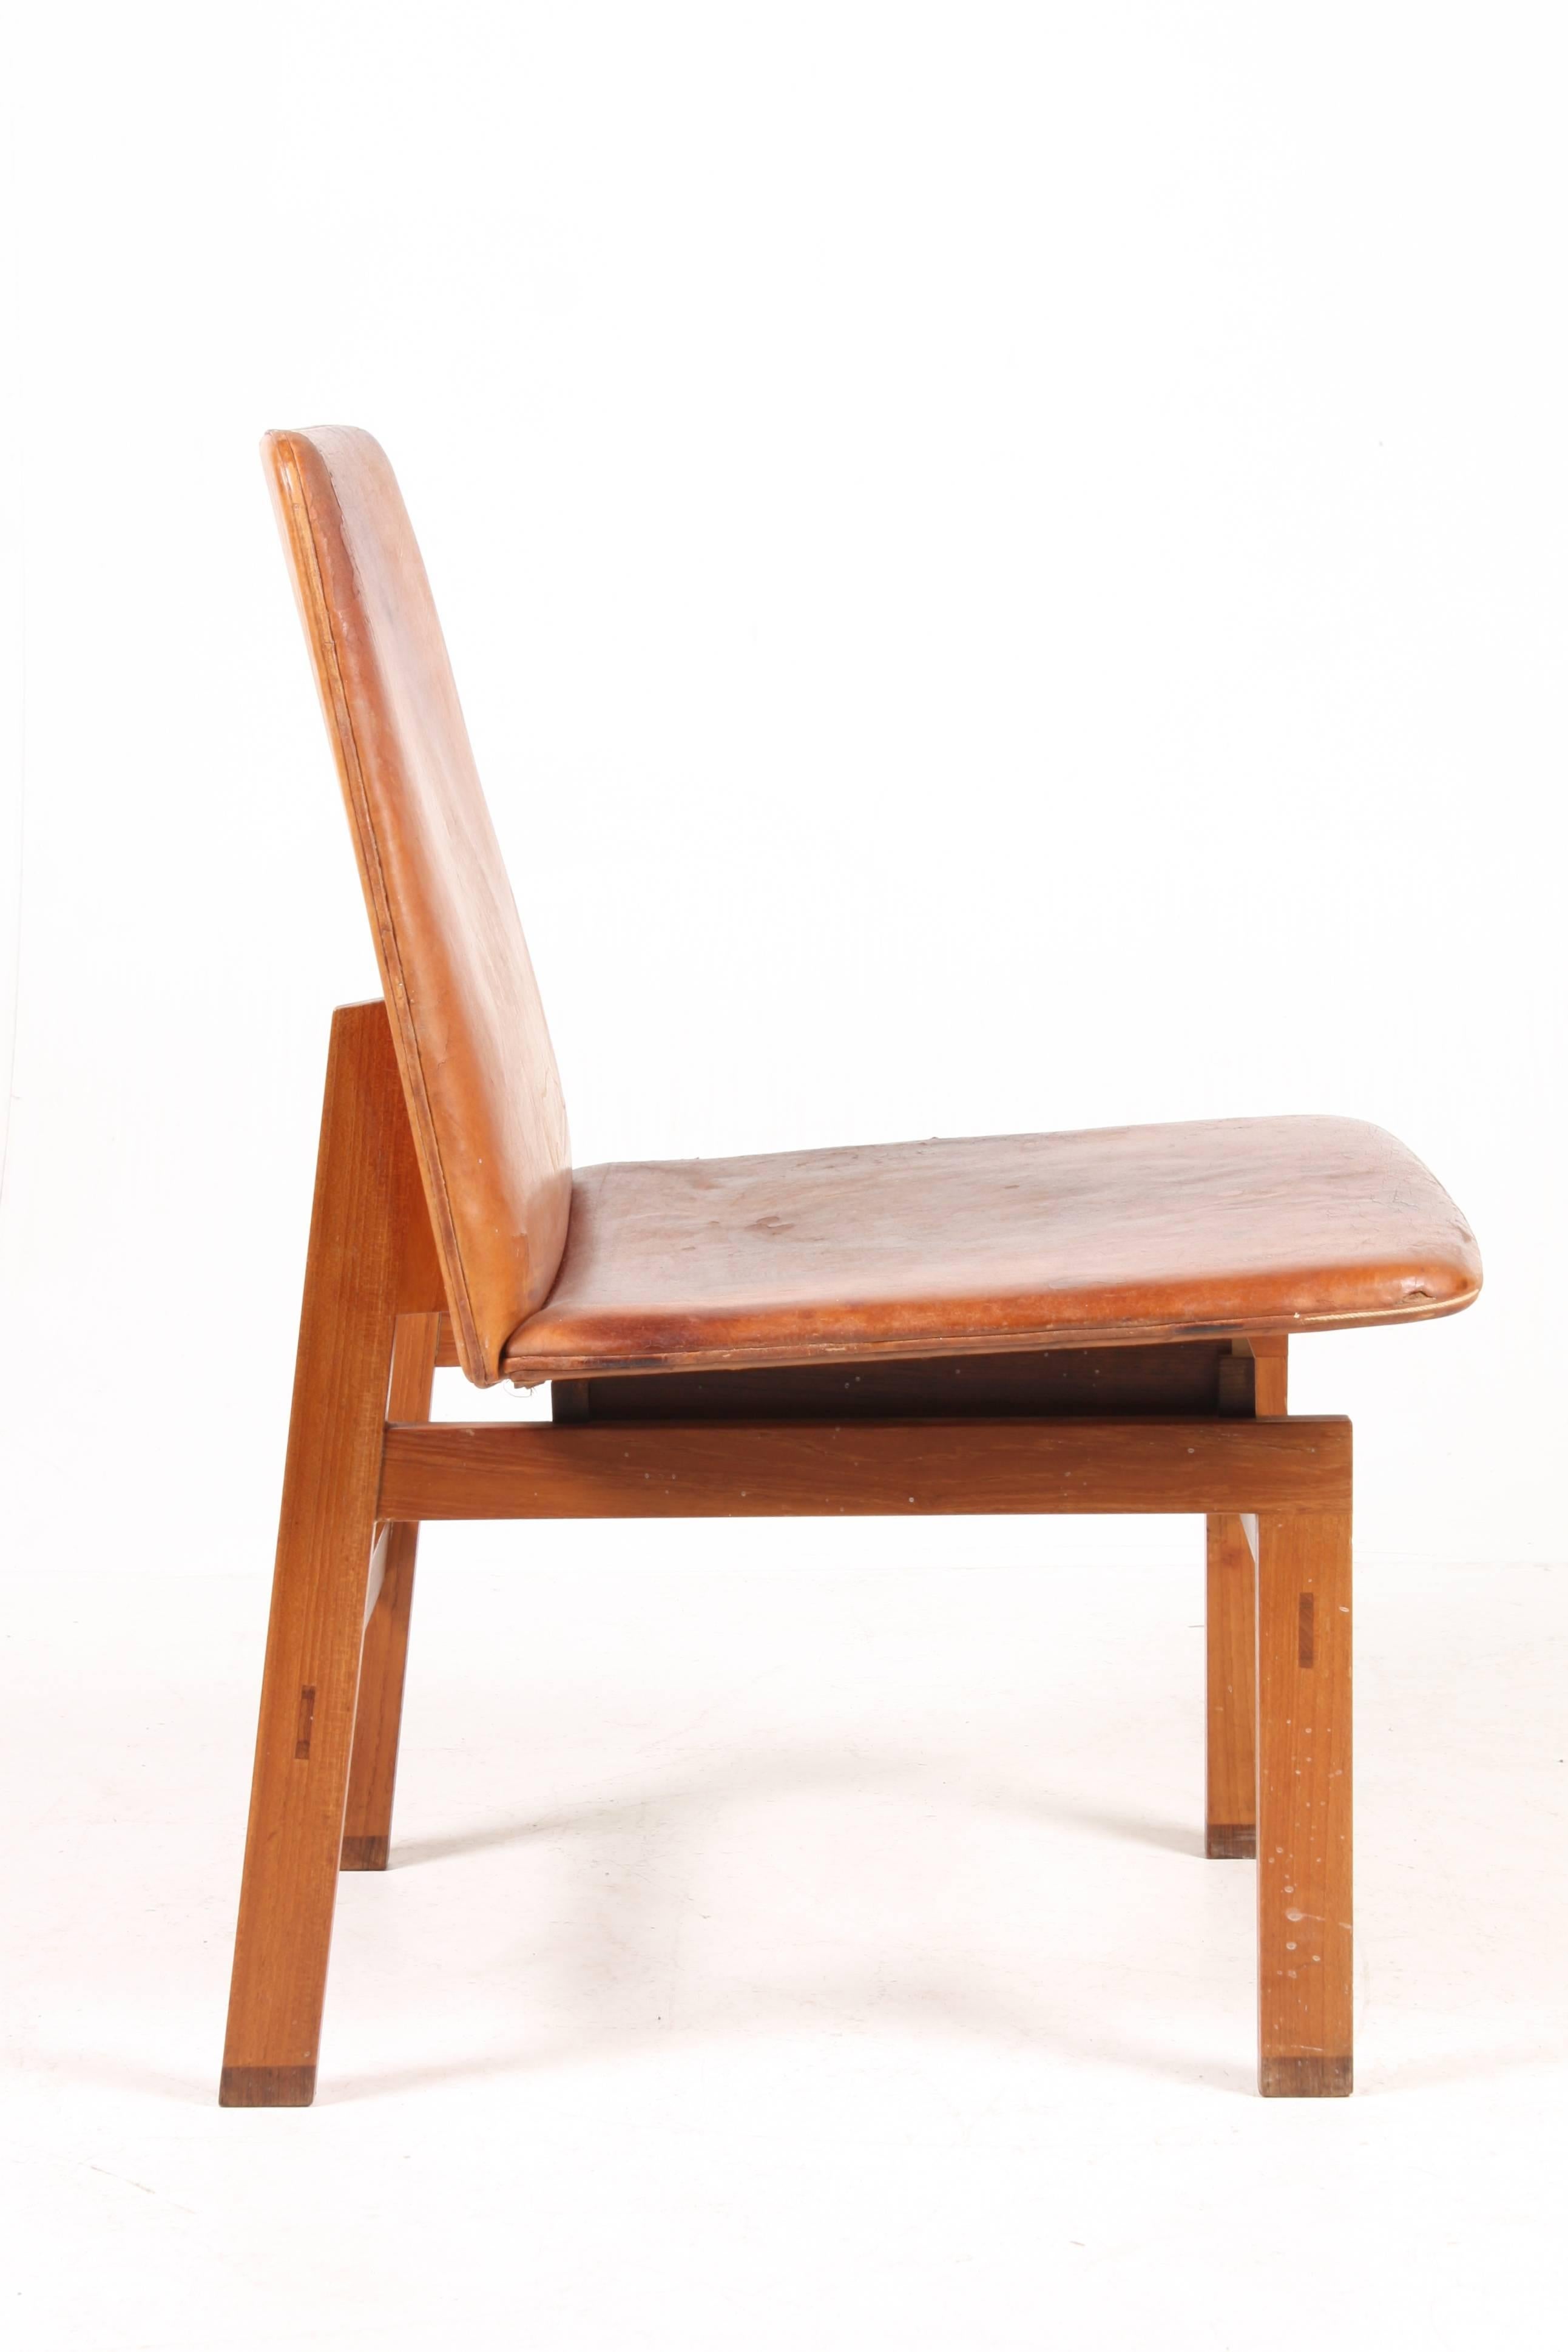 Stunning side chair in solid teak with rosewood details. Seat and back in patinated leather. Made in Denmark in the 1950s.